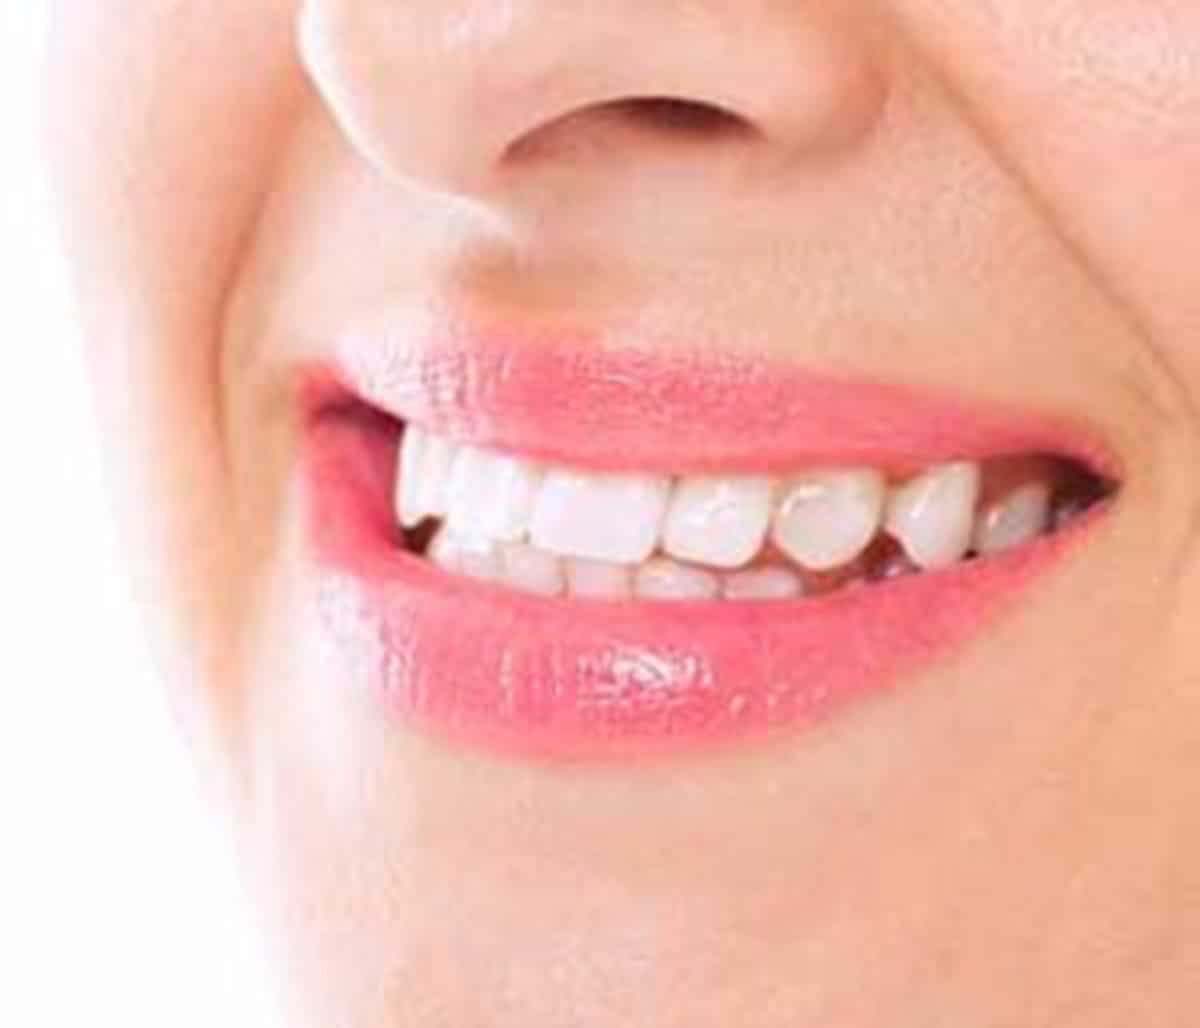 brighten smiles with professional teeth whitening.